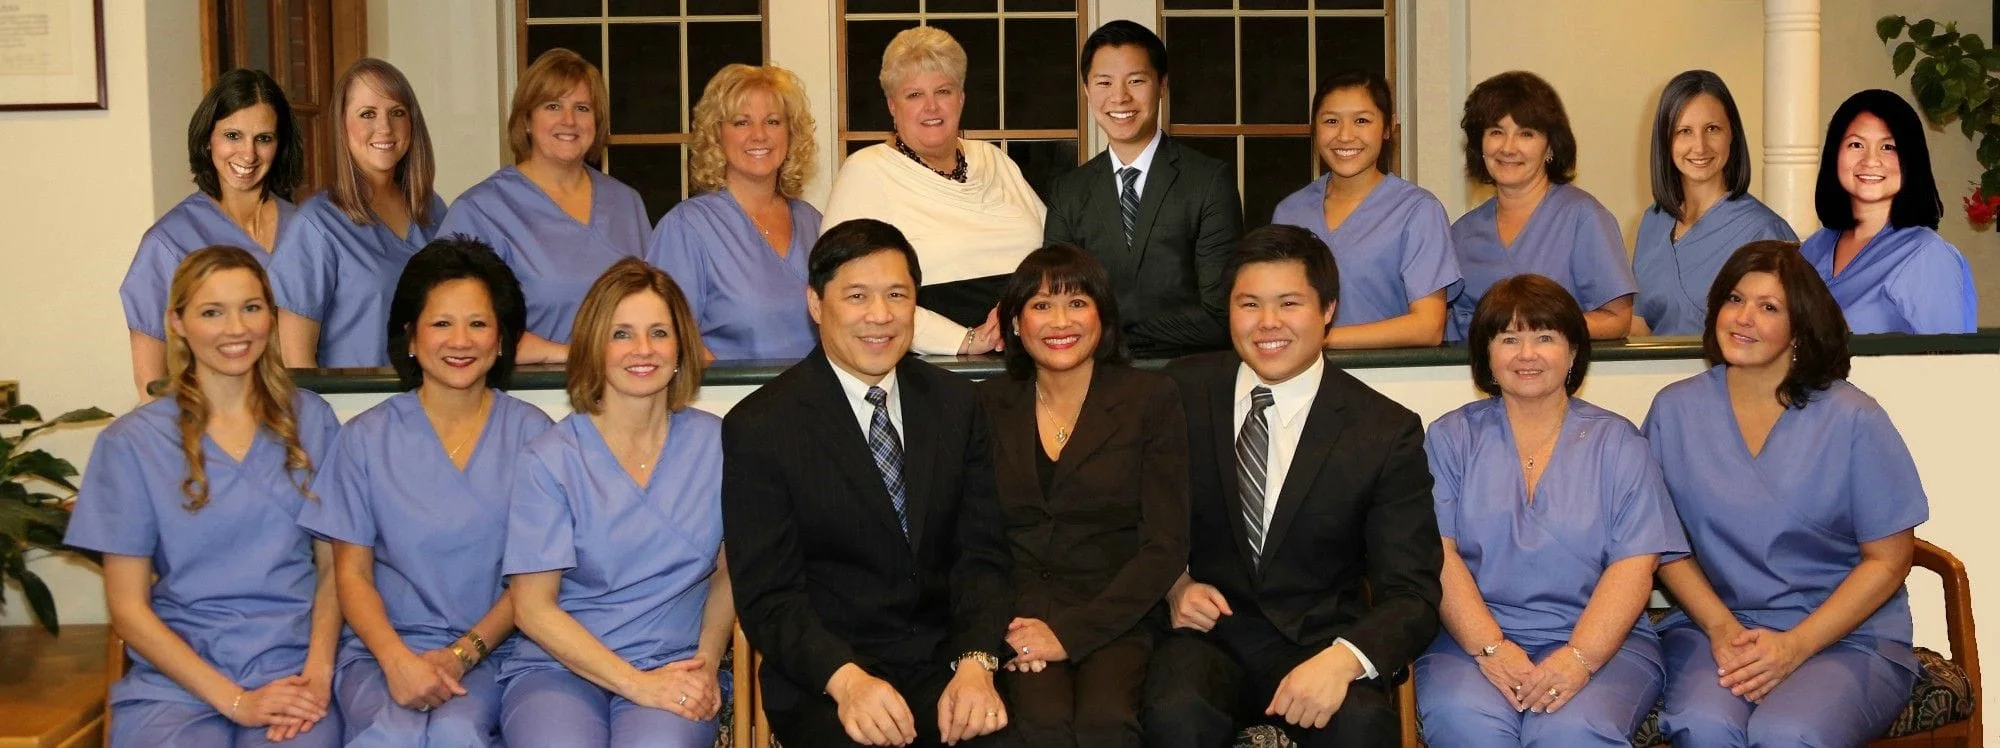 Pan Dental Care doctors and staff photo, family dentistry Melrose, MA